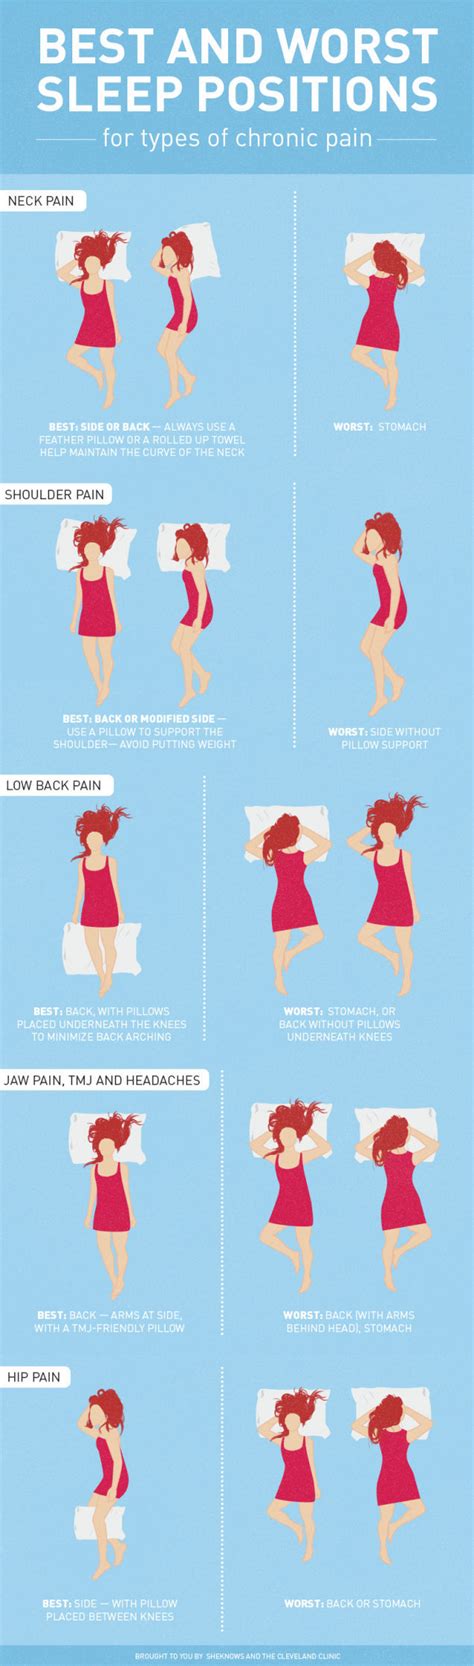 Best And Worst Sleep Positions Pictures Photos And Images For